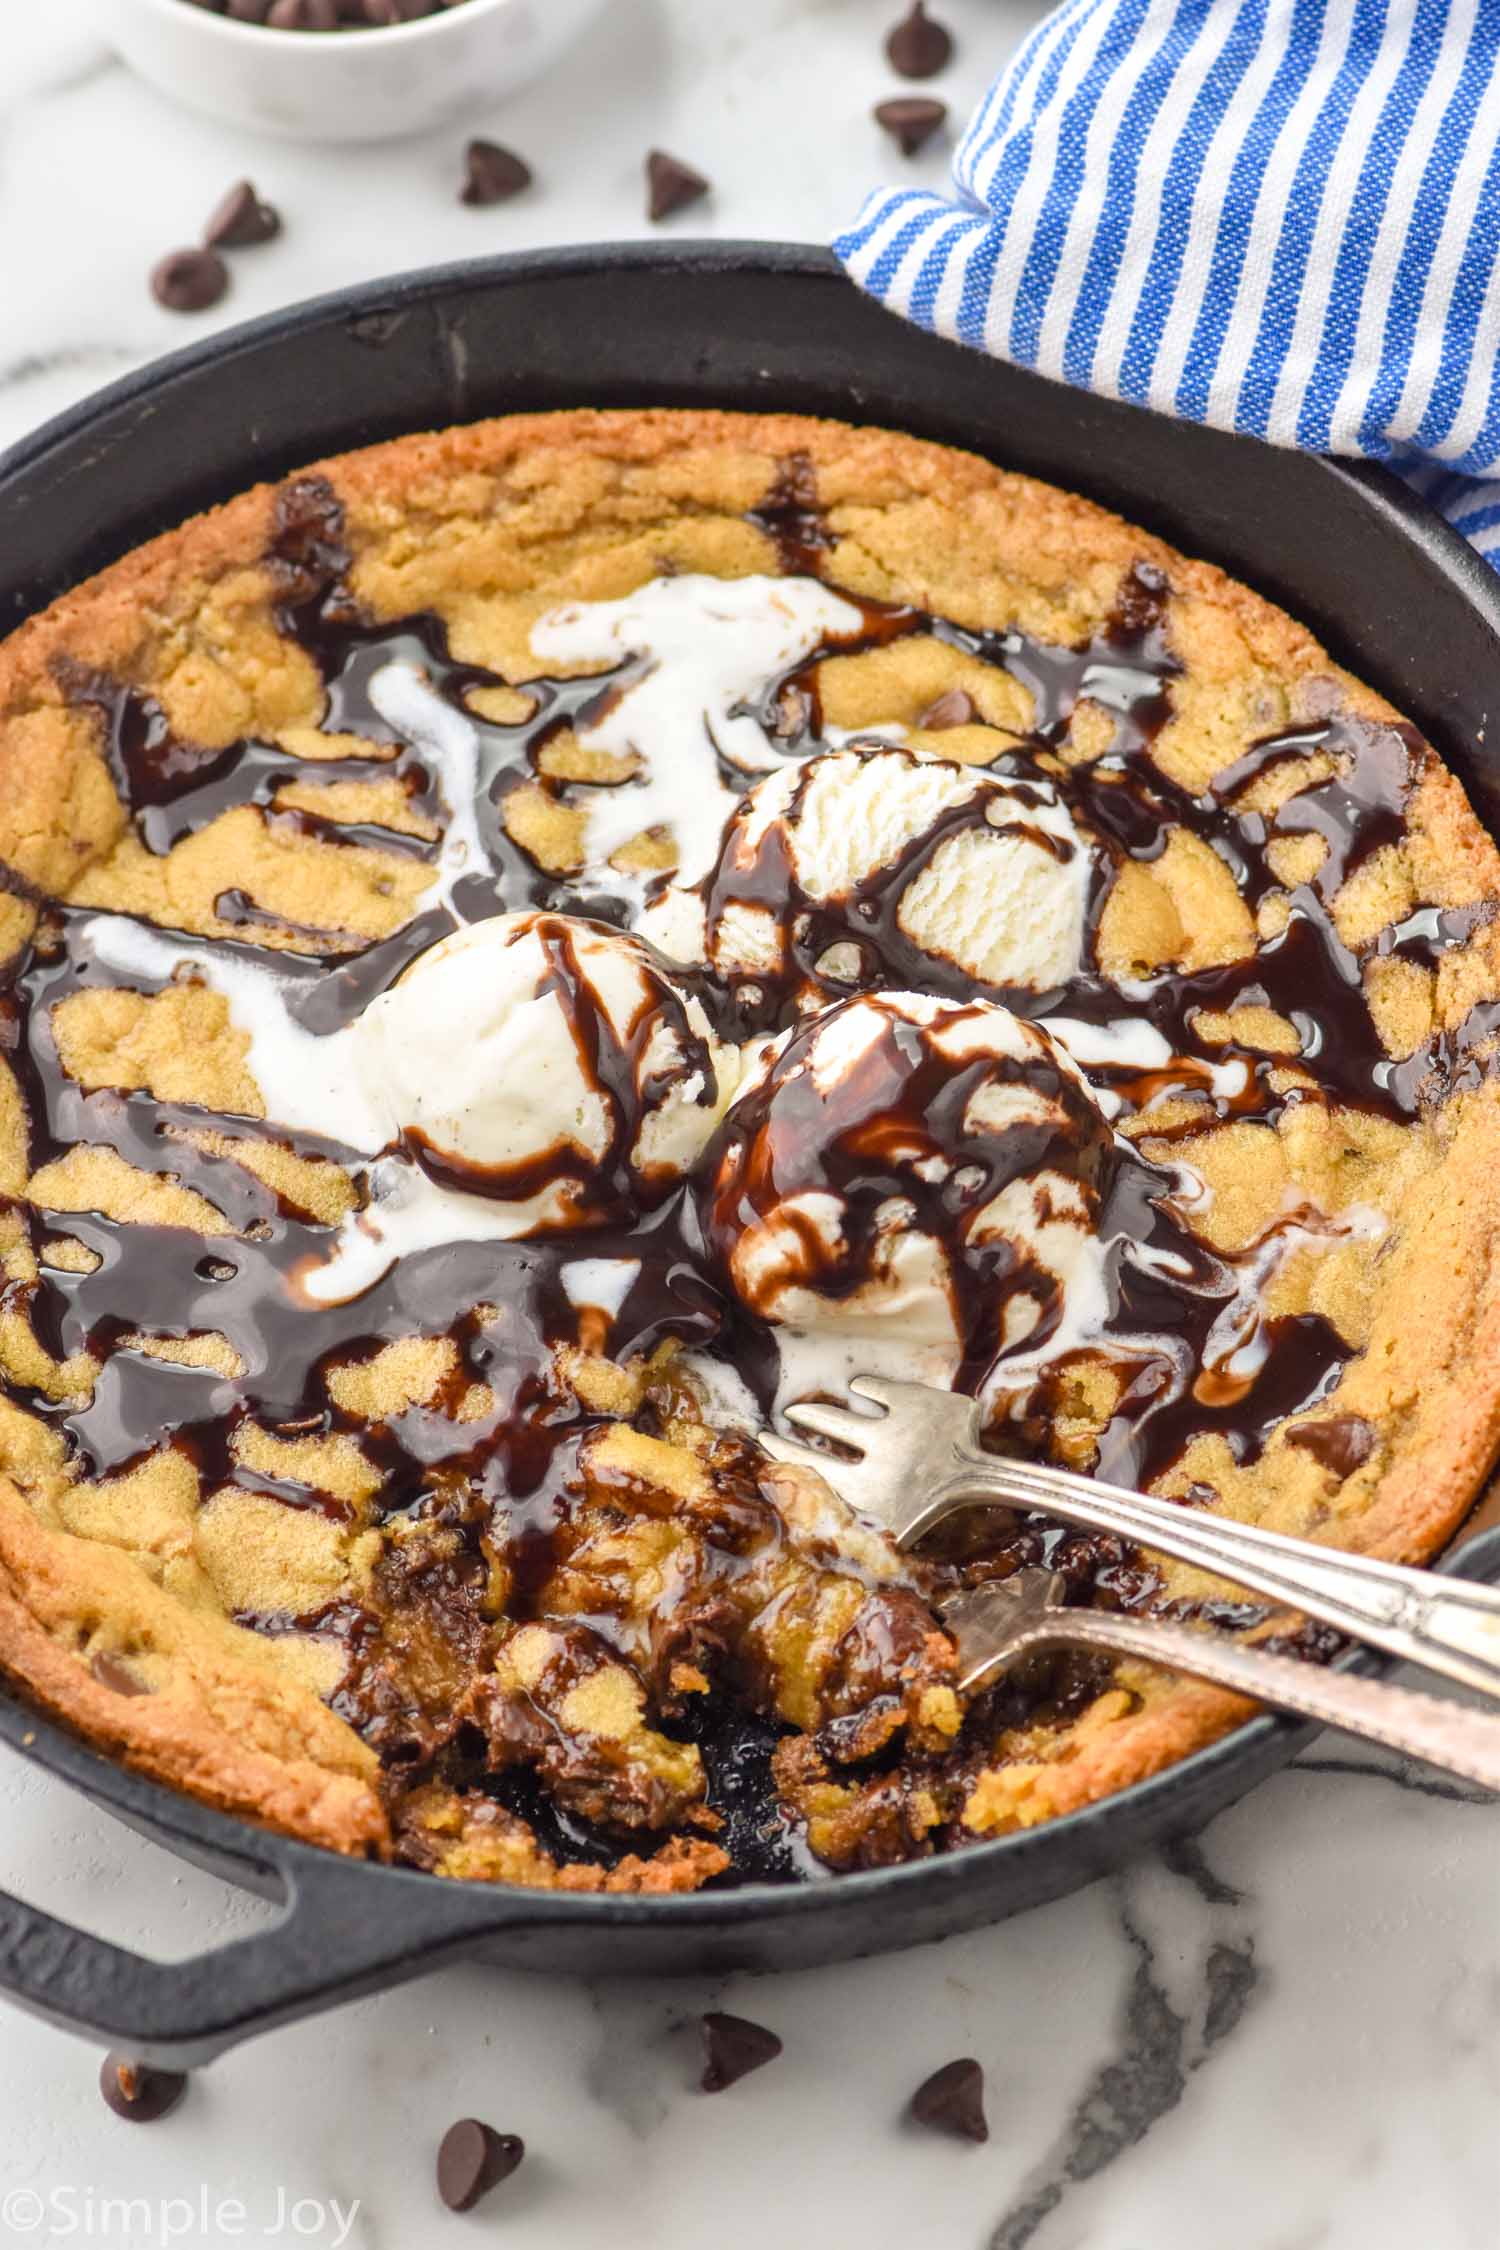 EASY Pizookie Recipe (Cookie Pizza) - I Heart Naptime